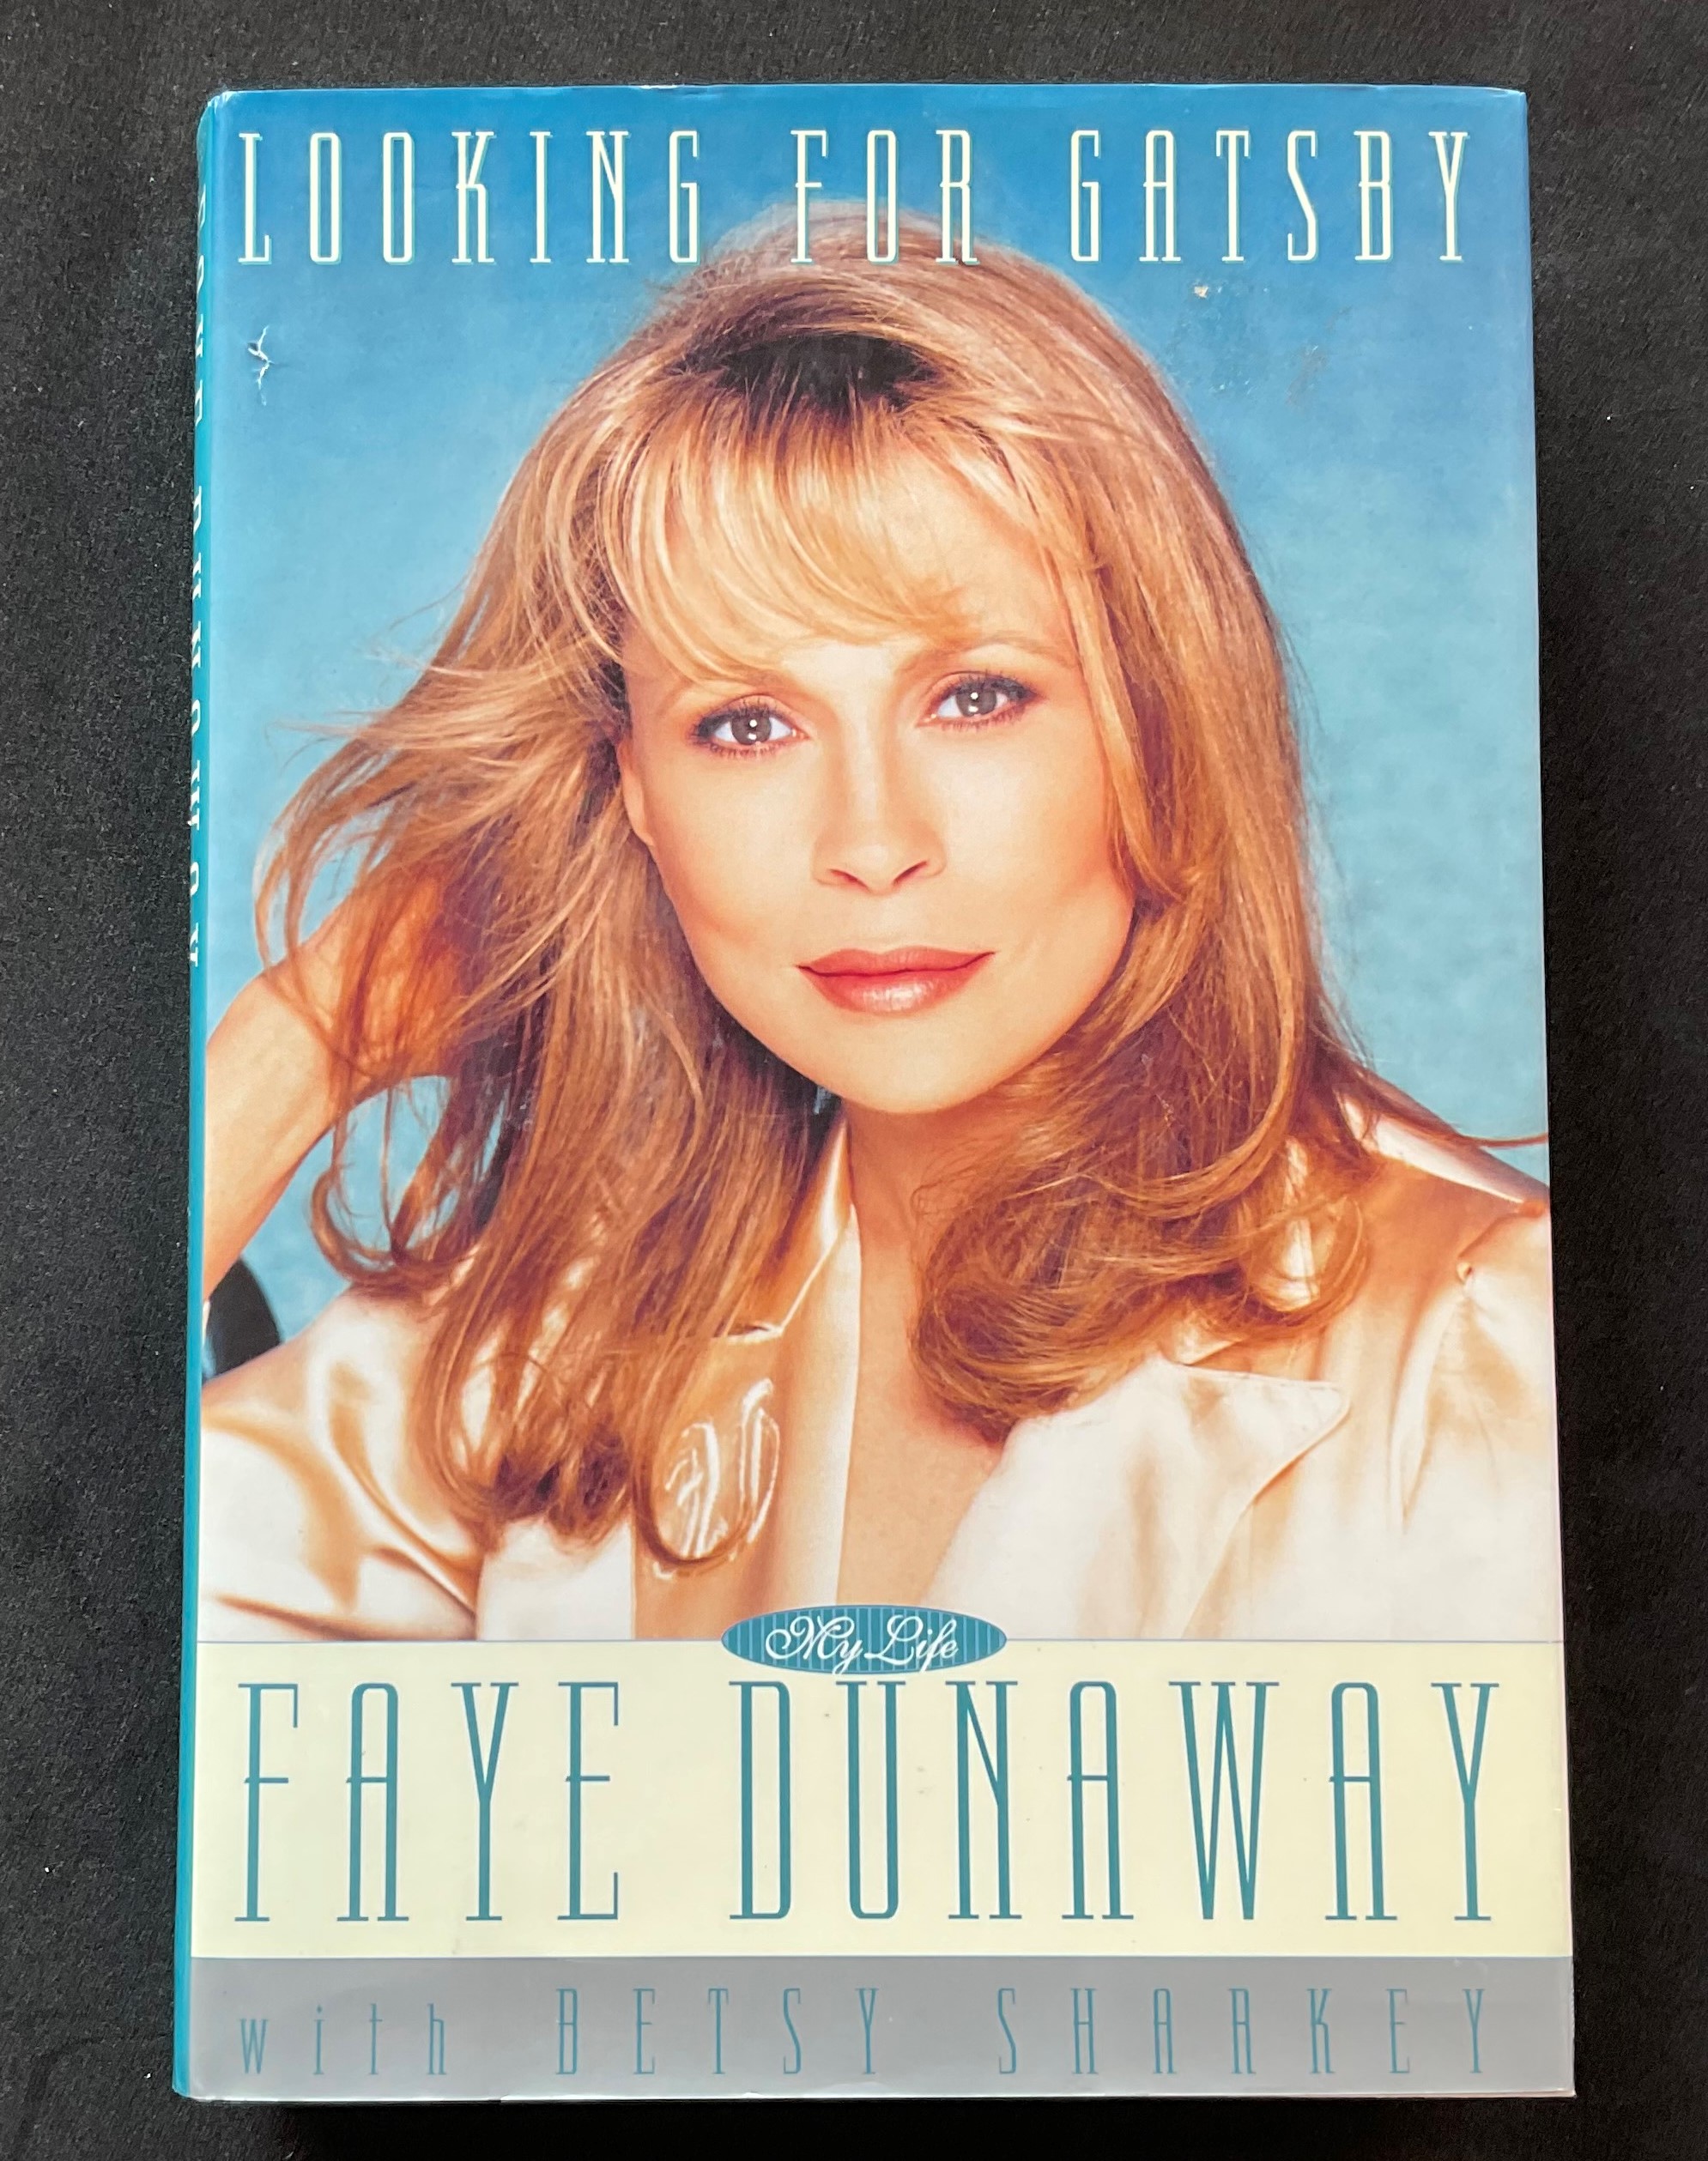 Actress Faye Dunaways autobiography Looking for Gatsby, signed and dedicated to Don. Dorothy Faye